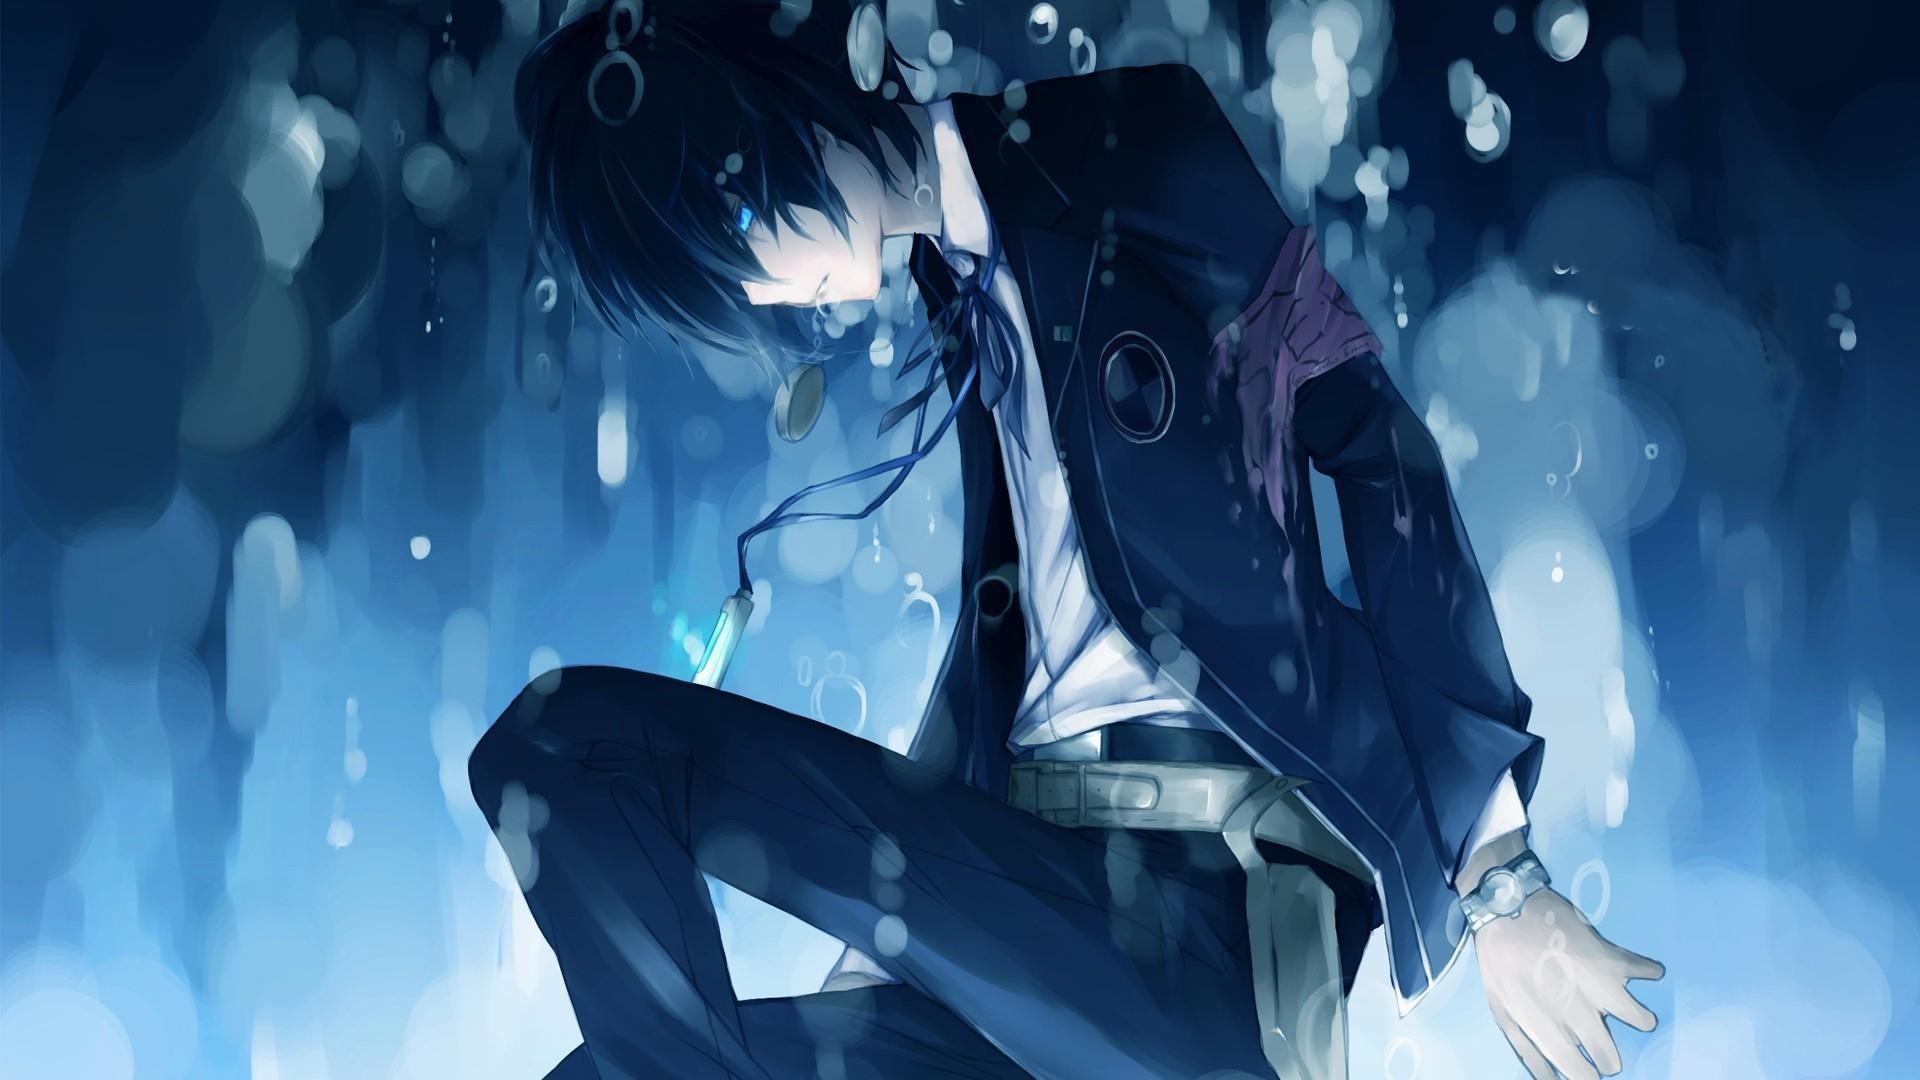 Handsome Anime Characters HD Wallpapers - Wallpaper Cave